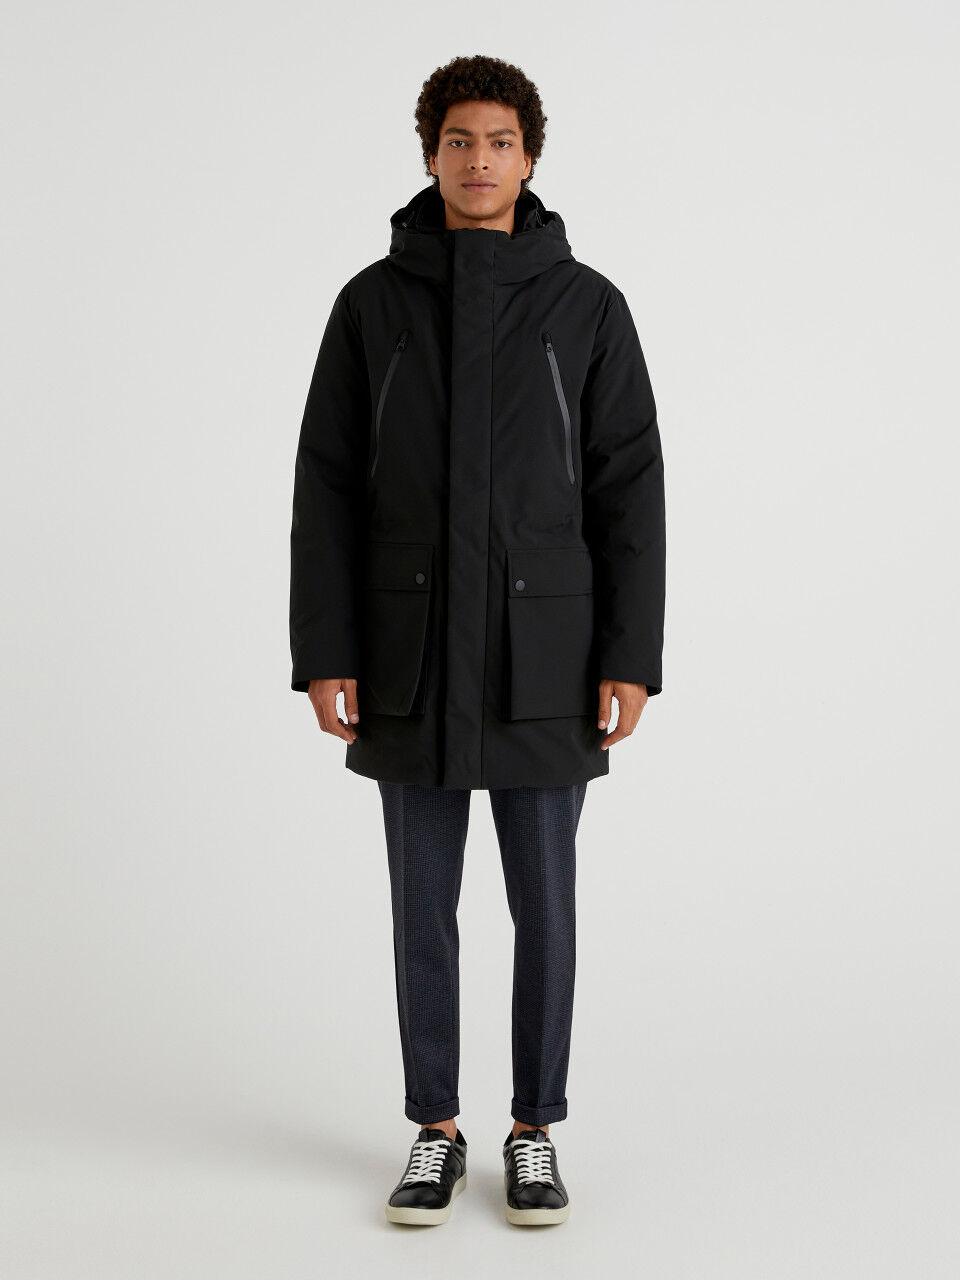 Men's Coats and Jackets Collection 2022 | Benetton